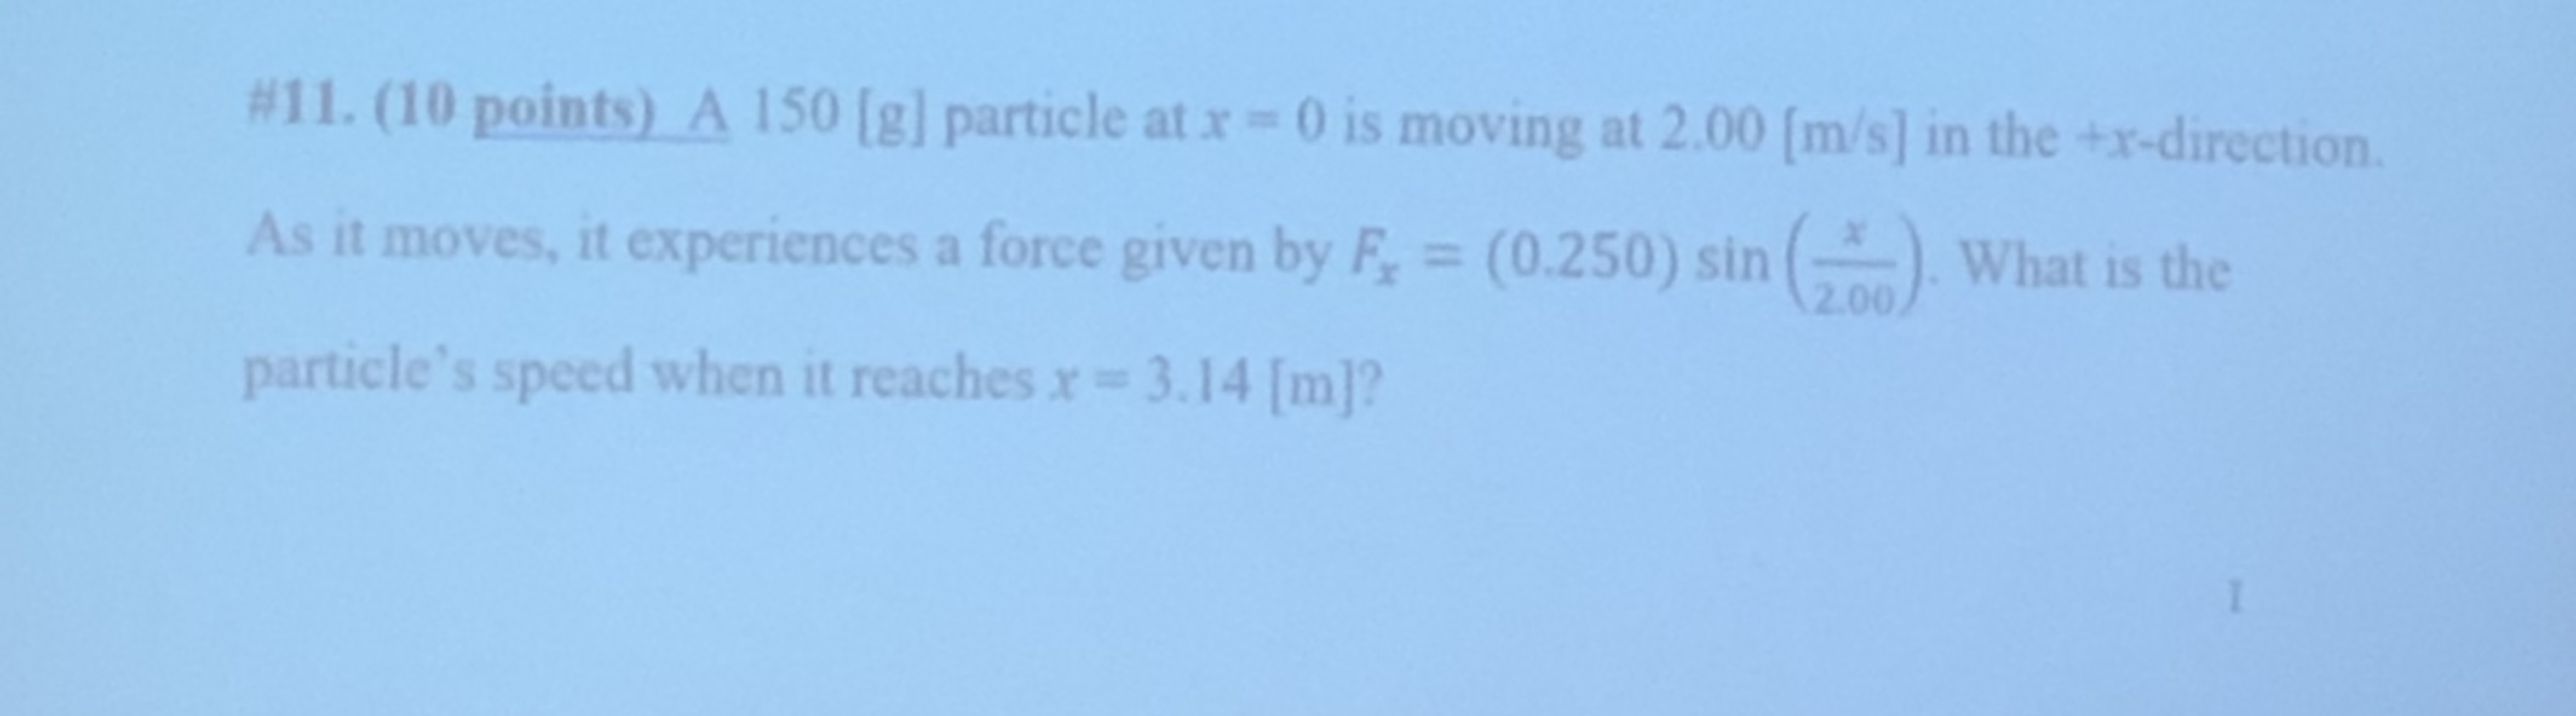 #11. (10 points) A 150 [g] particle at x 0 is moving at 2.00 [m/s] in the +x-direction
As it moves, it experiences a force given by F (0.250) sin ( What is the
2.00
particle's speed when it reaches r= 3.14 [m]?
